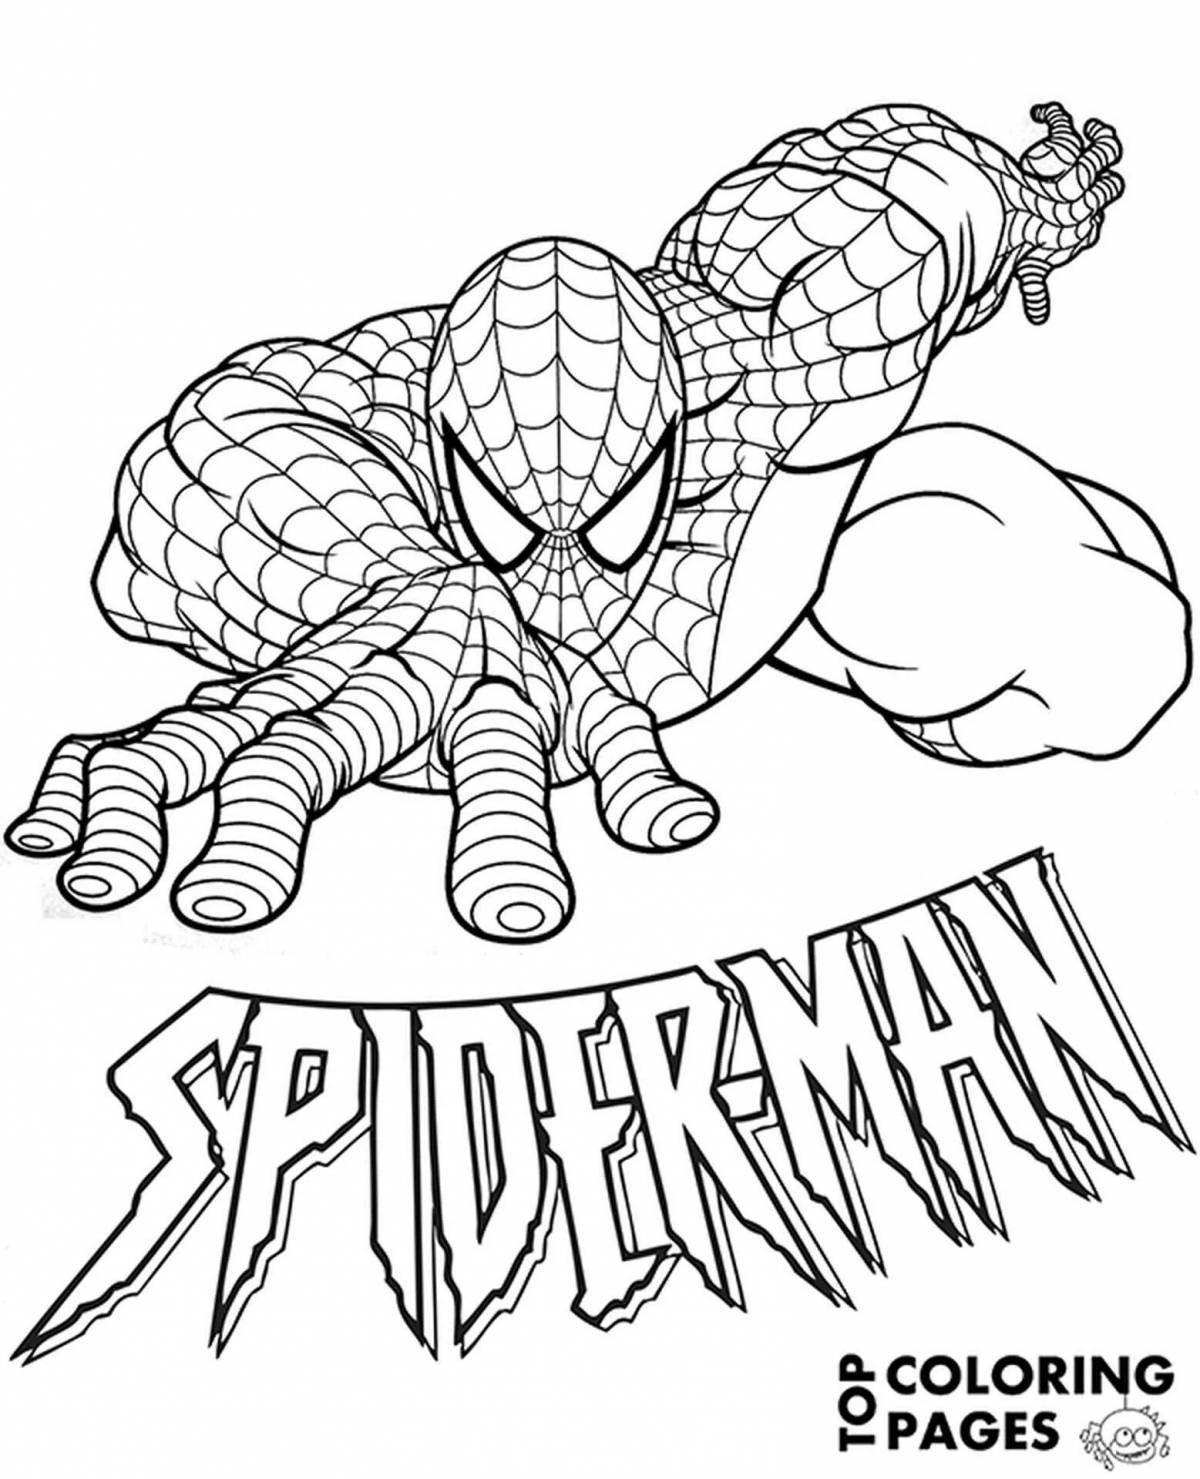 Spider-man colorful coloring book